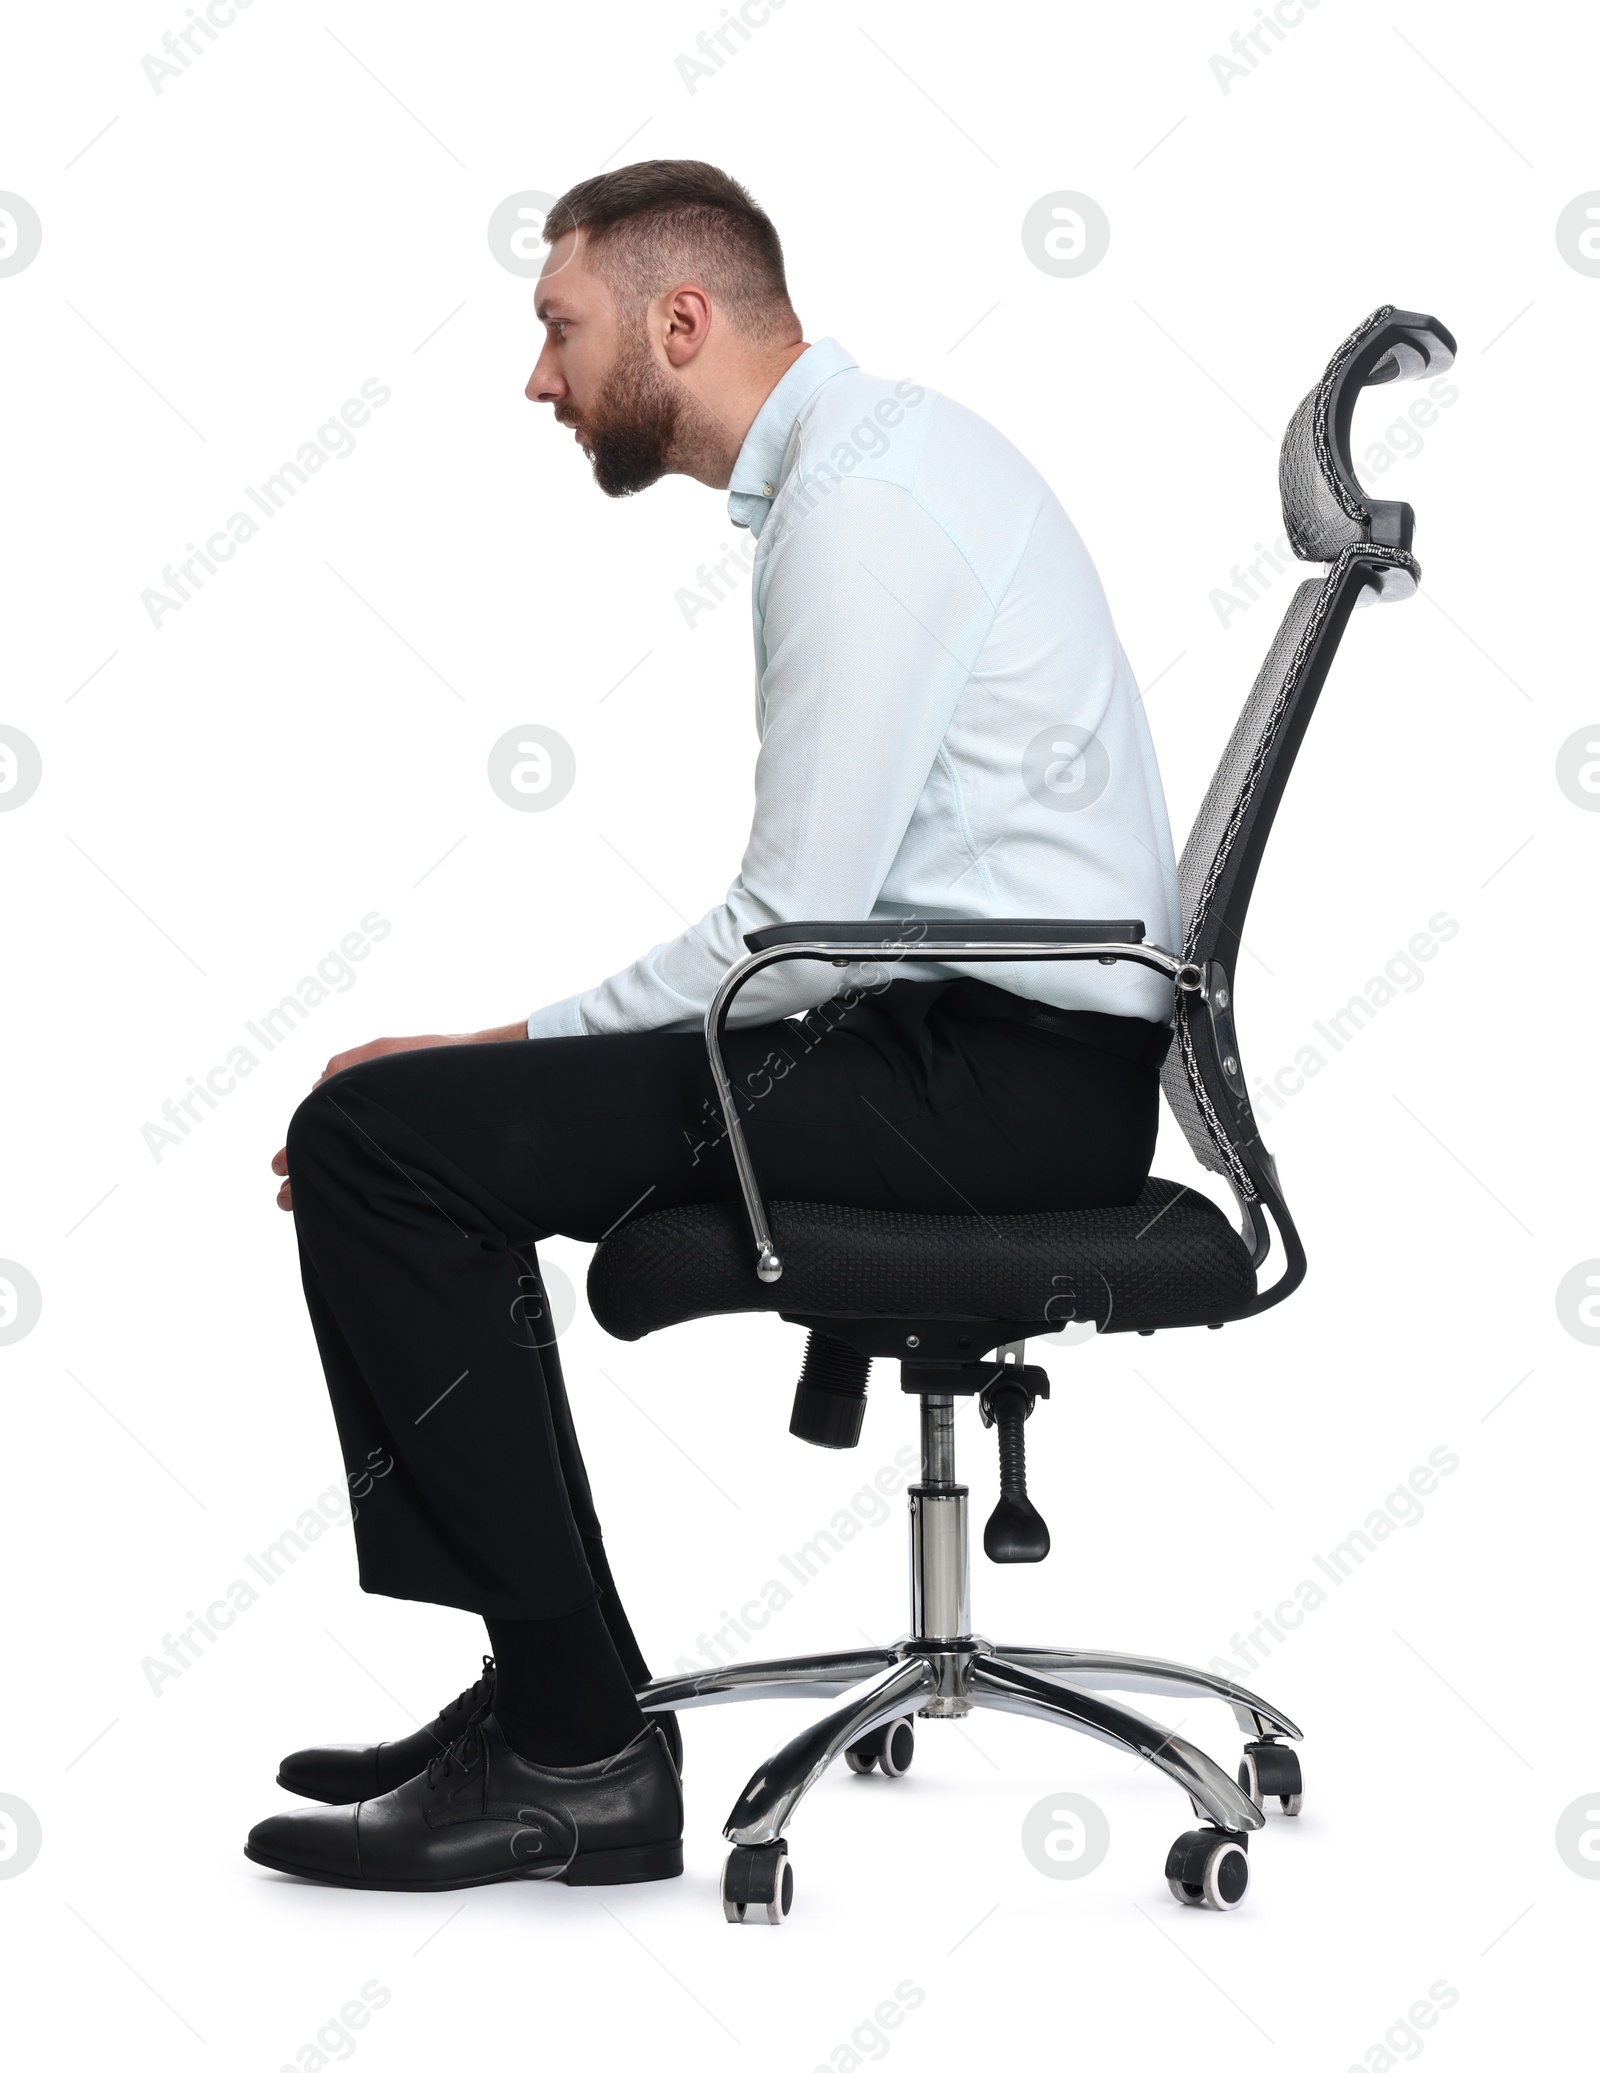 Photo of Man with poor posture sitting on chair against white background